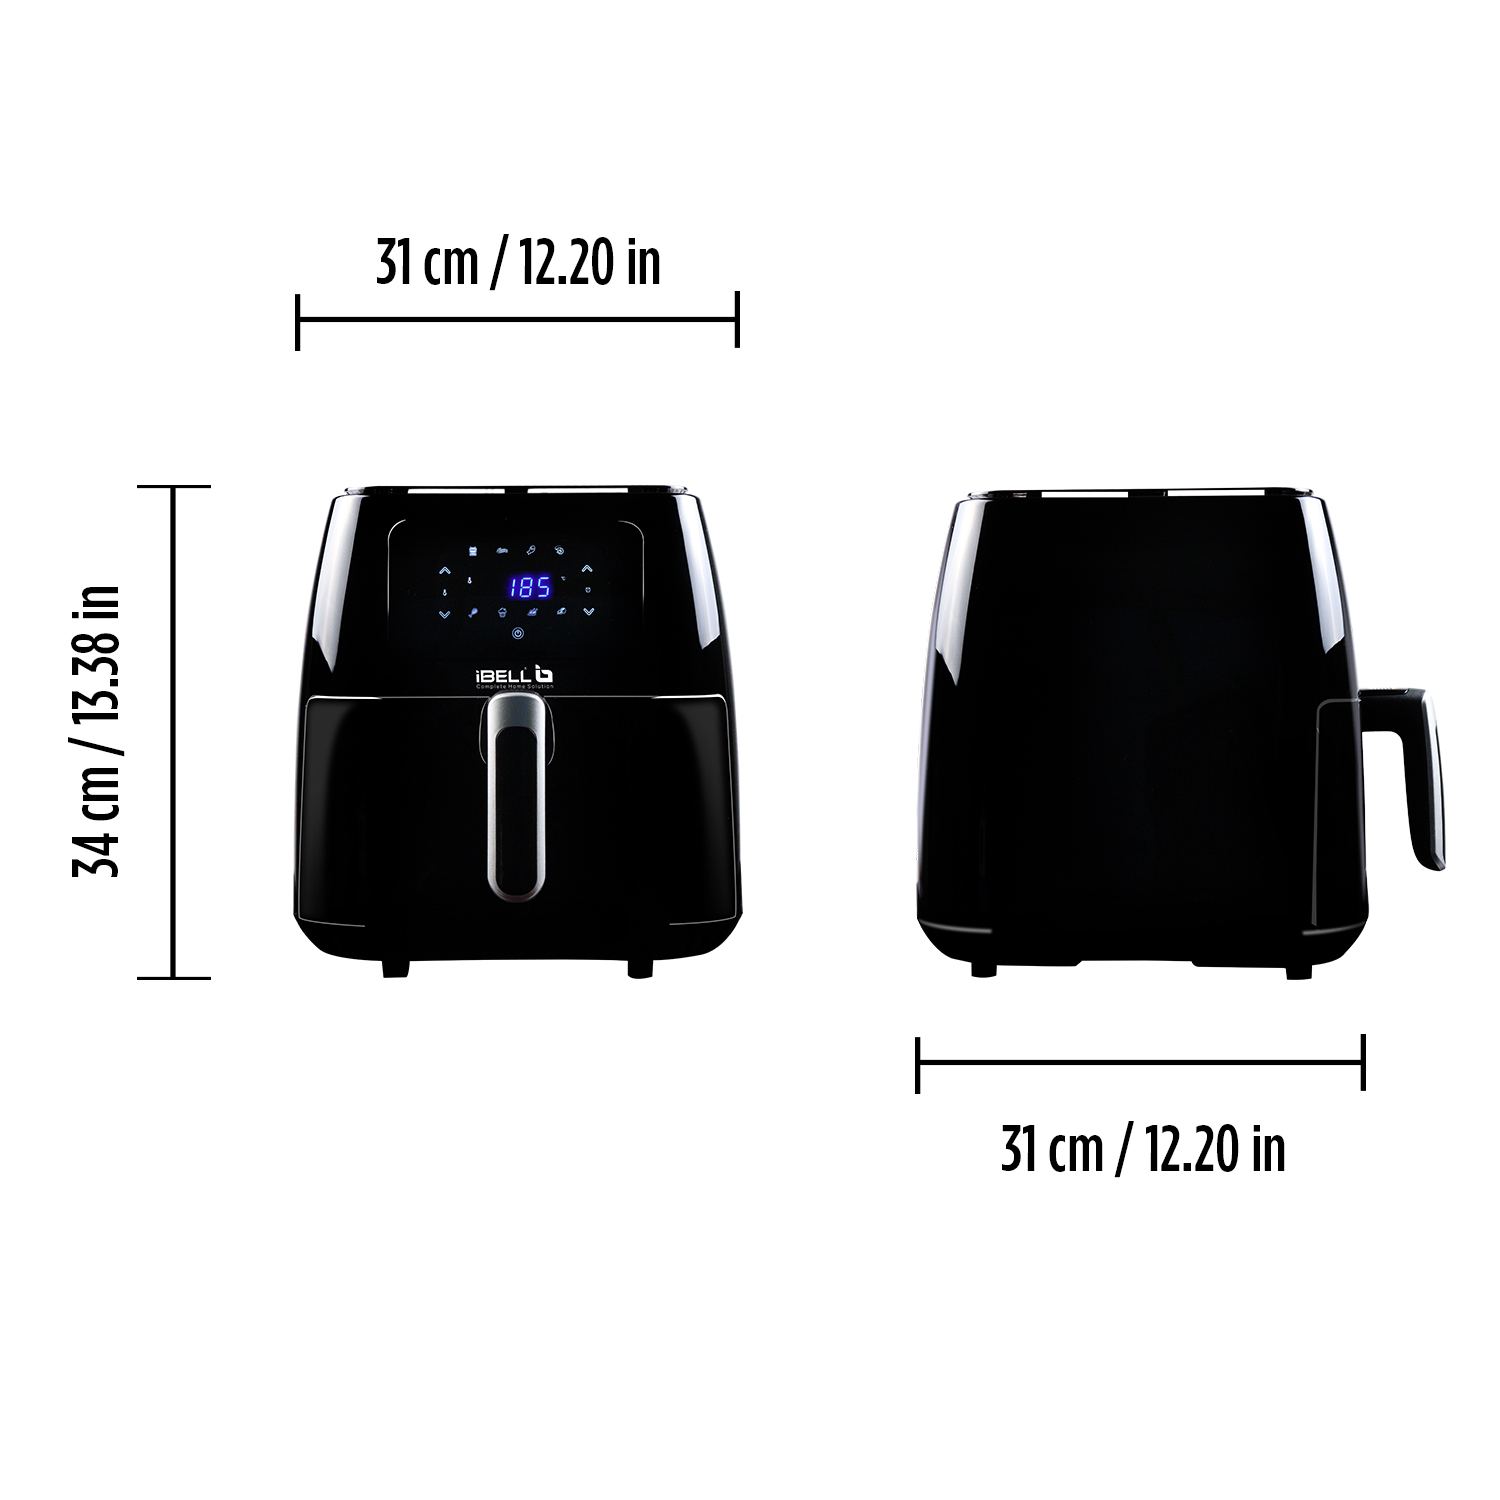 4D System Includes Recipe Book. 8 Preset Programmes Time from 5 to 90 Minutes Multifunctional Air Fryer Marble Coating 3 litres of Capacity Automatic Paddle 100-240 ºC